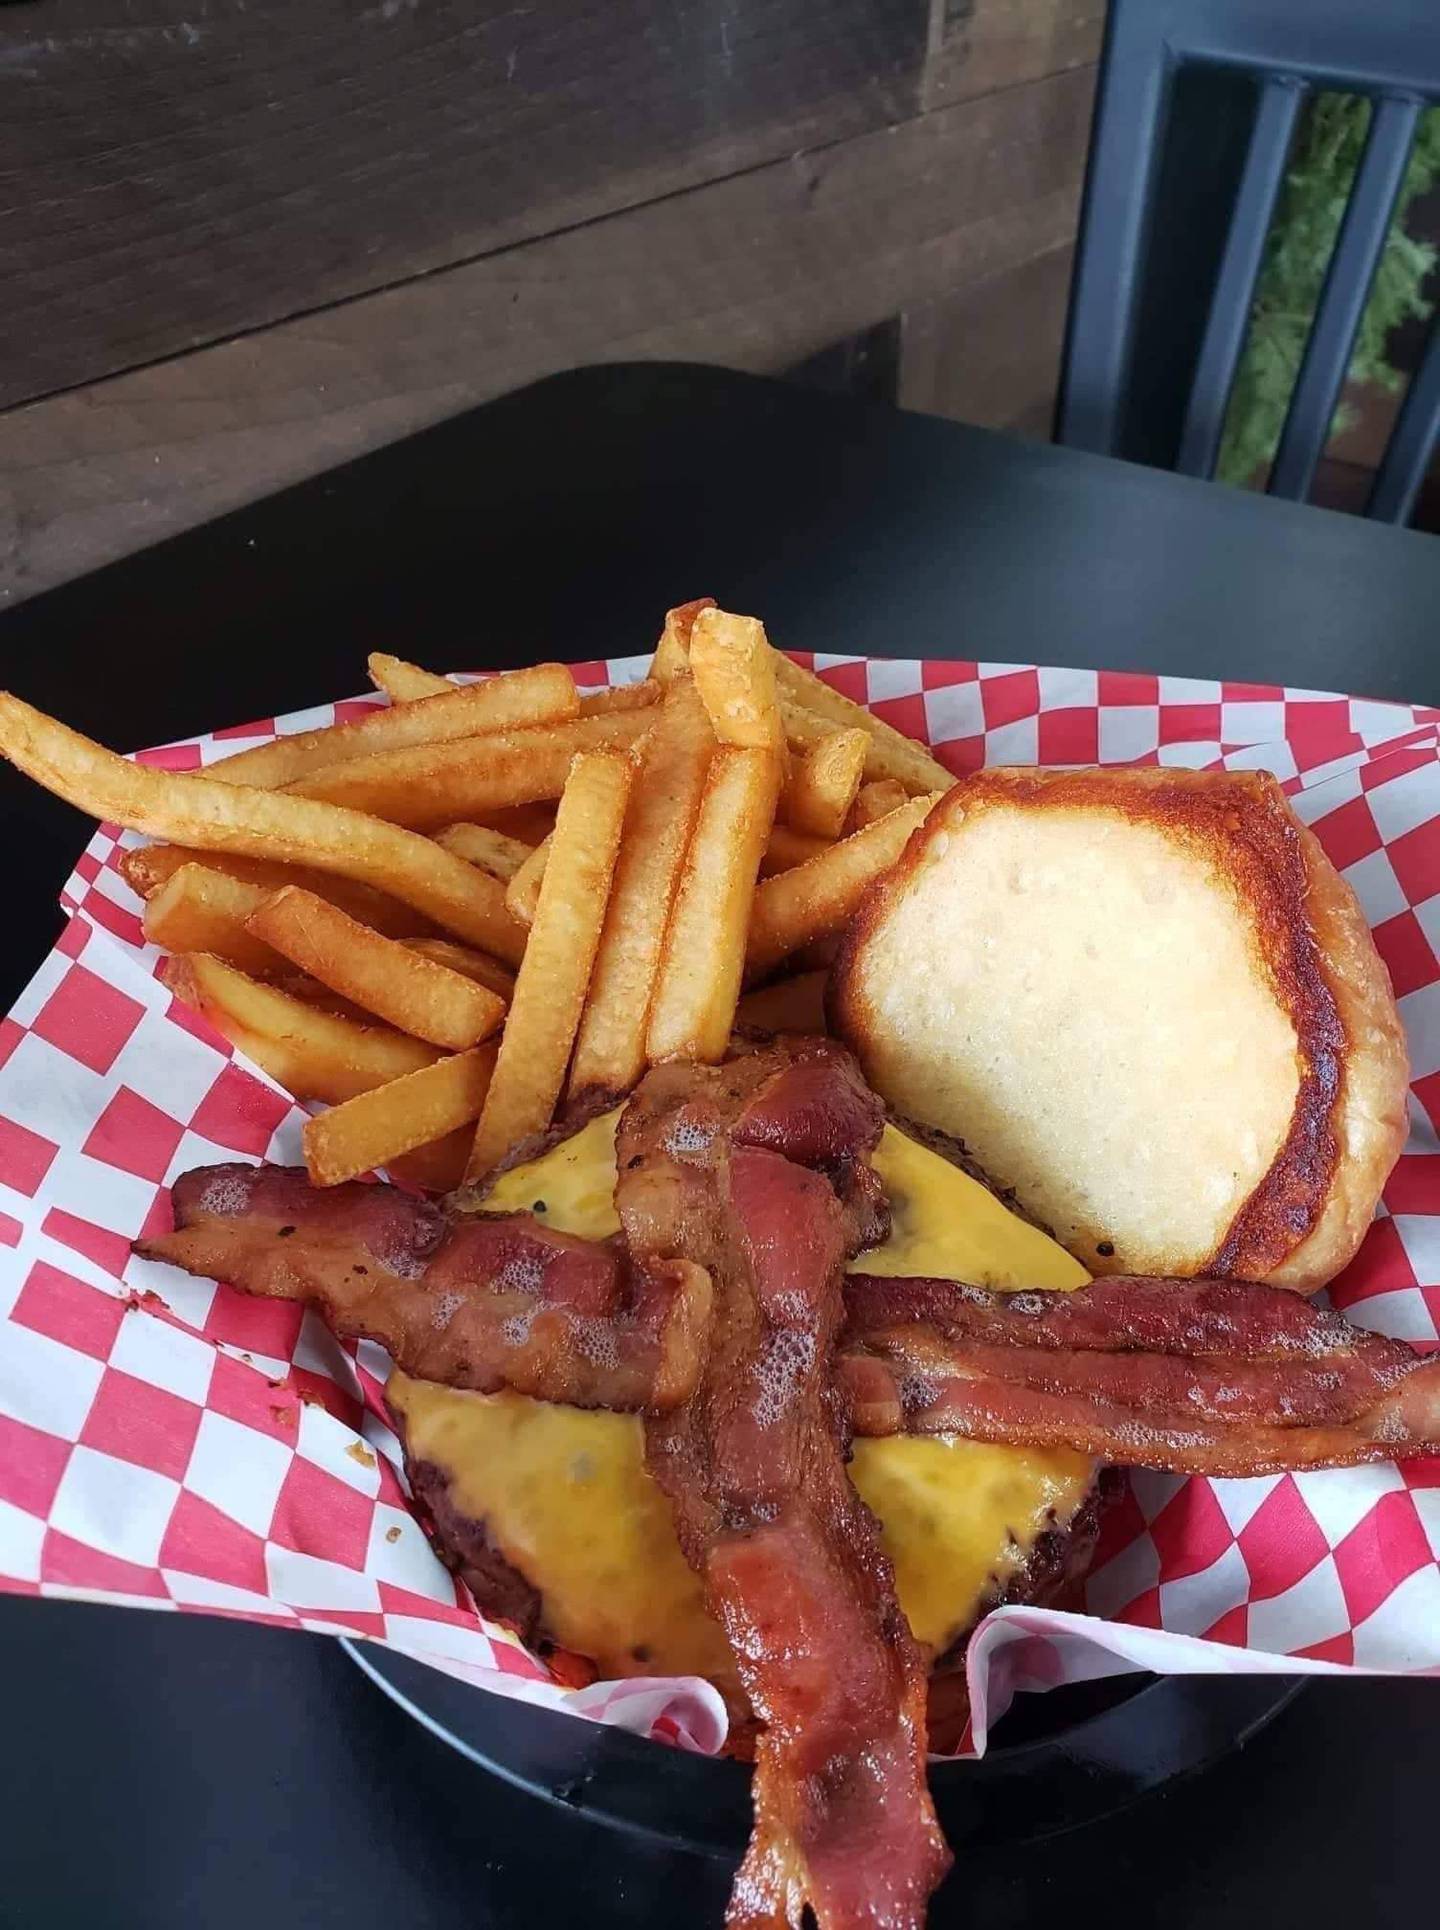 Sib's Corner Grill in Genoa was named in the top 10 finest burger places in DeKalb County by readers in 2021 as picked by readers.